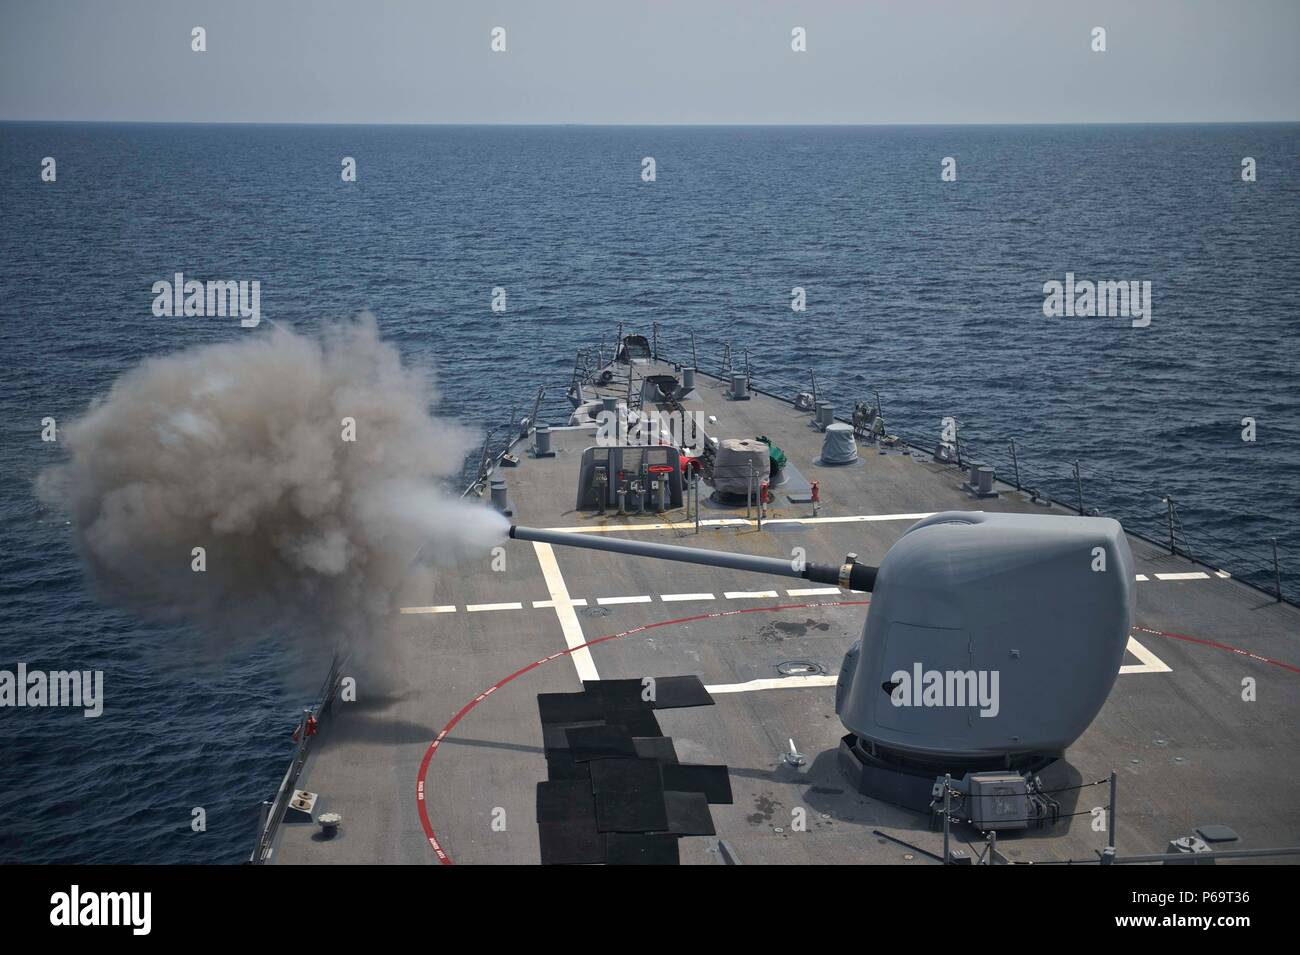 160521-N-QC631-234 WATERS SURROUNDING THE KOREAN PENINSULA (May 21, 2016) A MK 45 5 inch gun is fired during gunnery exercises aboard the guided-missile destroyer USS Decatur (DDG 73). Decatur, along with USS Momsen (DDG 92) and USS Spruance (DDG 111), with embarked “Devil Fish” and “Warbirds” detachments of Helicopter Maritime Strike Squadron (HSM) 49, are deployed as part of a U.S. 3rd Fleet Pacific Surface Action Group (PAC SAG) under Destroyer Squadron (CDS) 31. (U.S. Navy photo by Mass Communication Specialist 3rd Class Gerald Dudley Reynolds/Released) Stock Photo